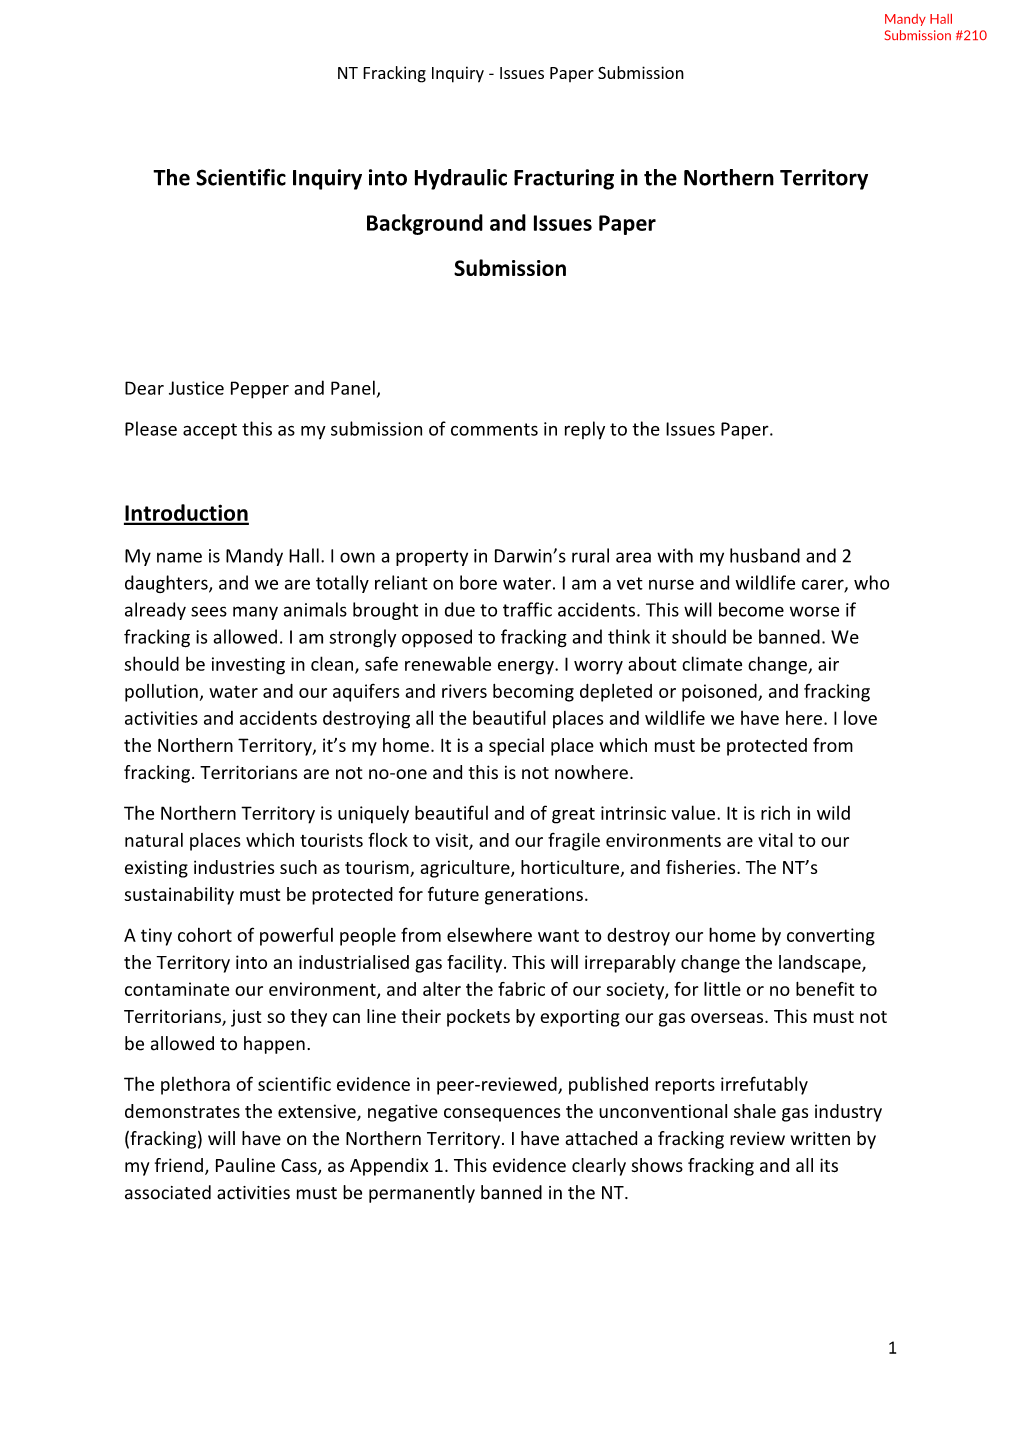 The Scientific Inquiry Into Hydraulic Fracturing in the Northern Territory Background and Issues Paper Submission Introduction